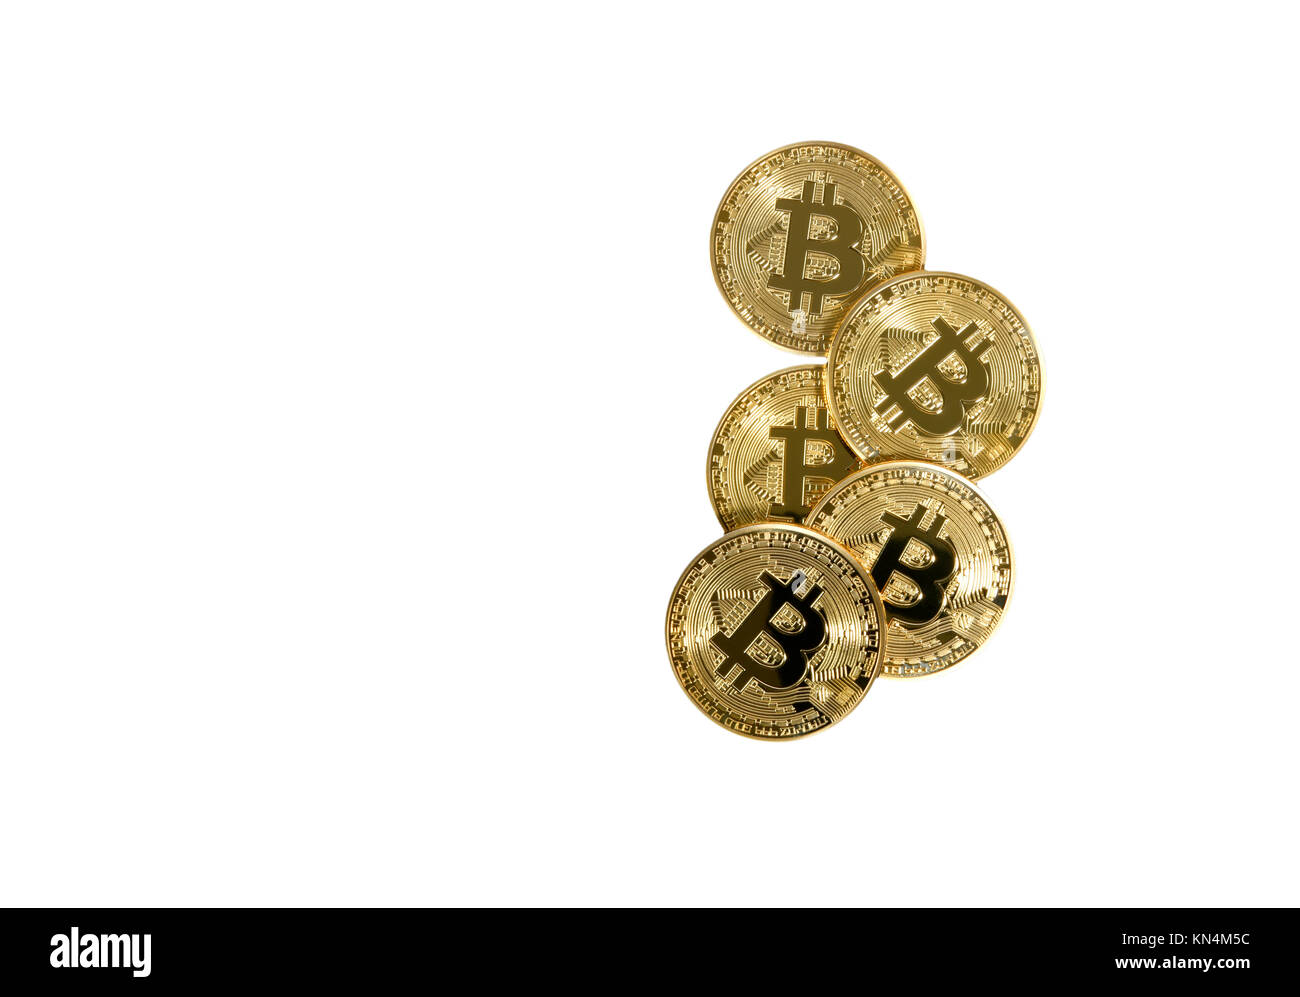 Symbol image digital currency, golden physical coin Bitcoin Stock Photo